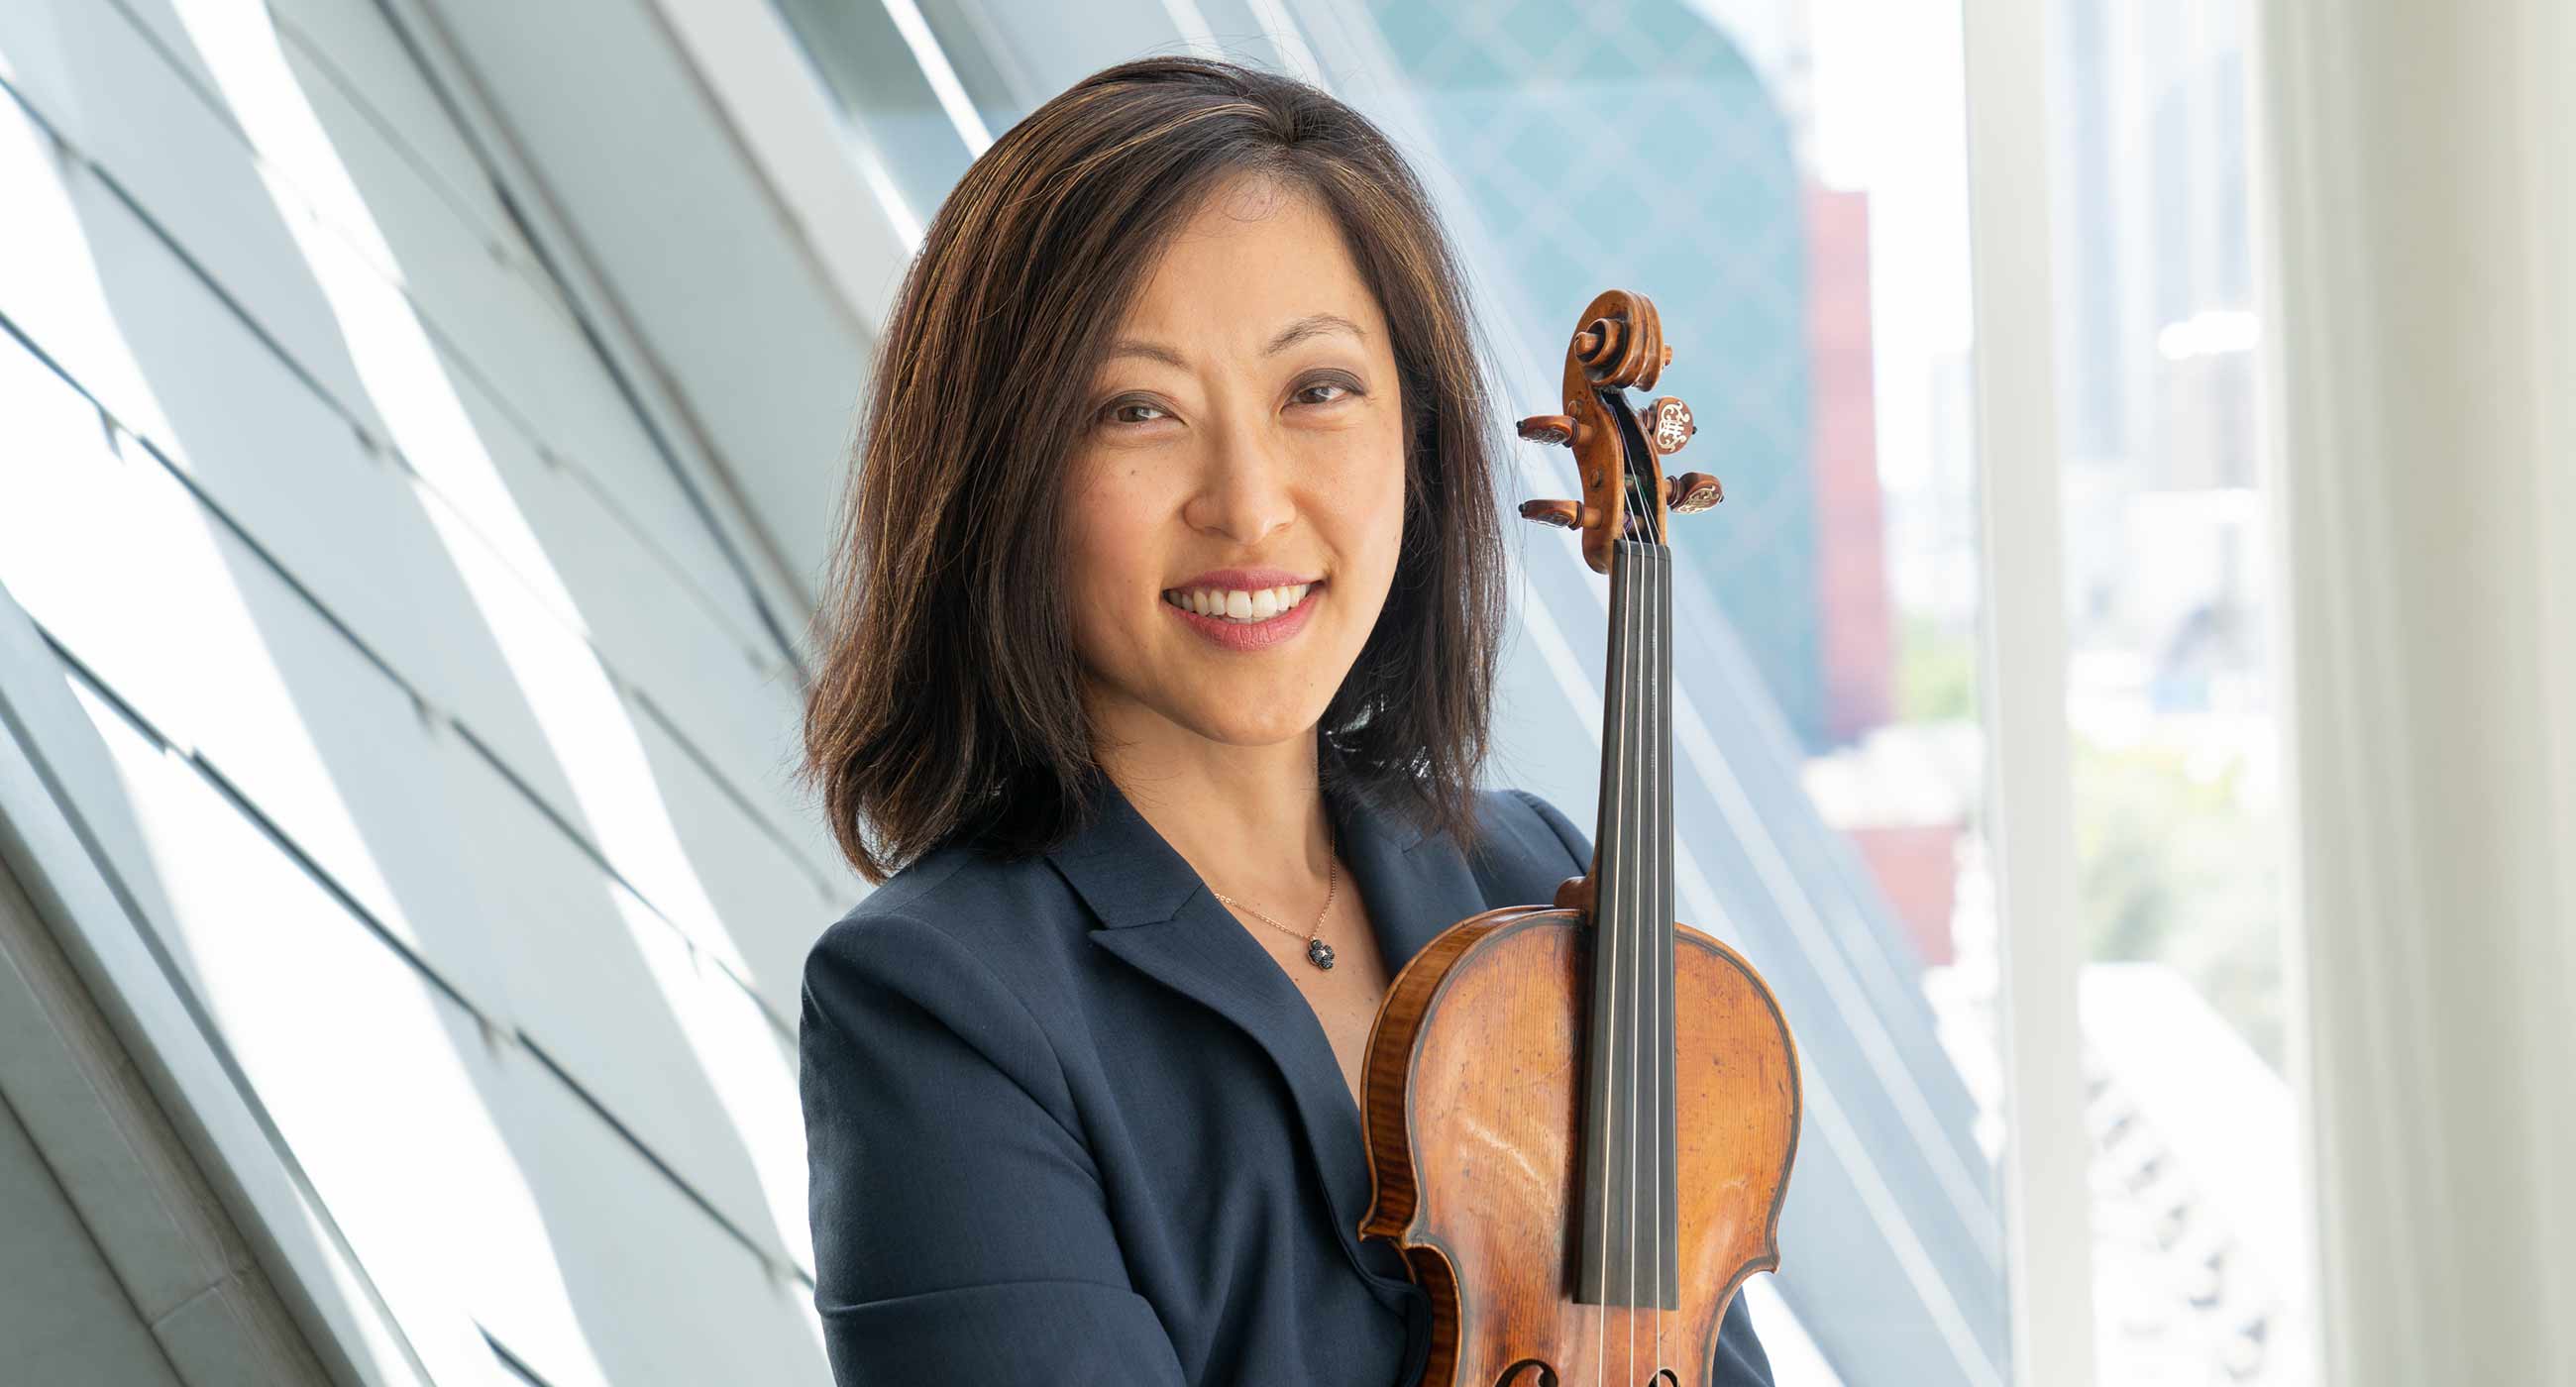 Joan Kwuon wearing a blazer, holding a violin, and smiling in front of a window.